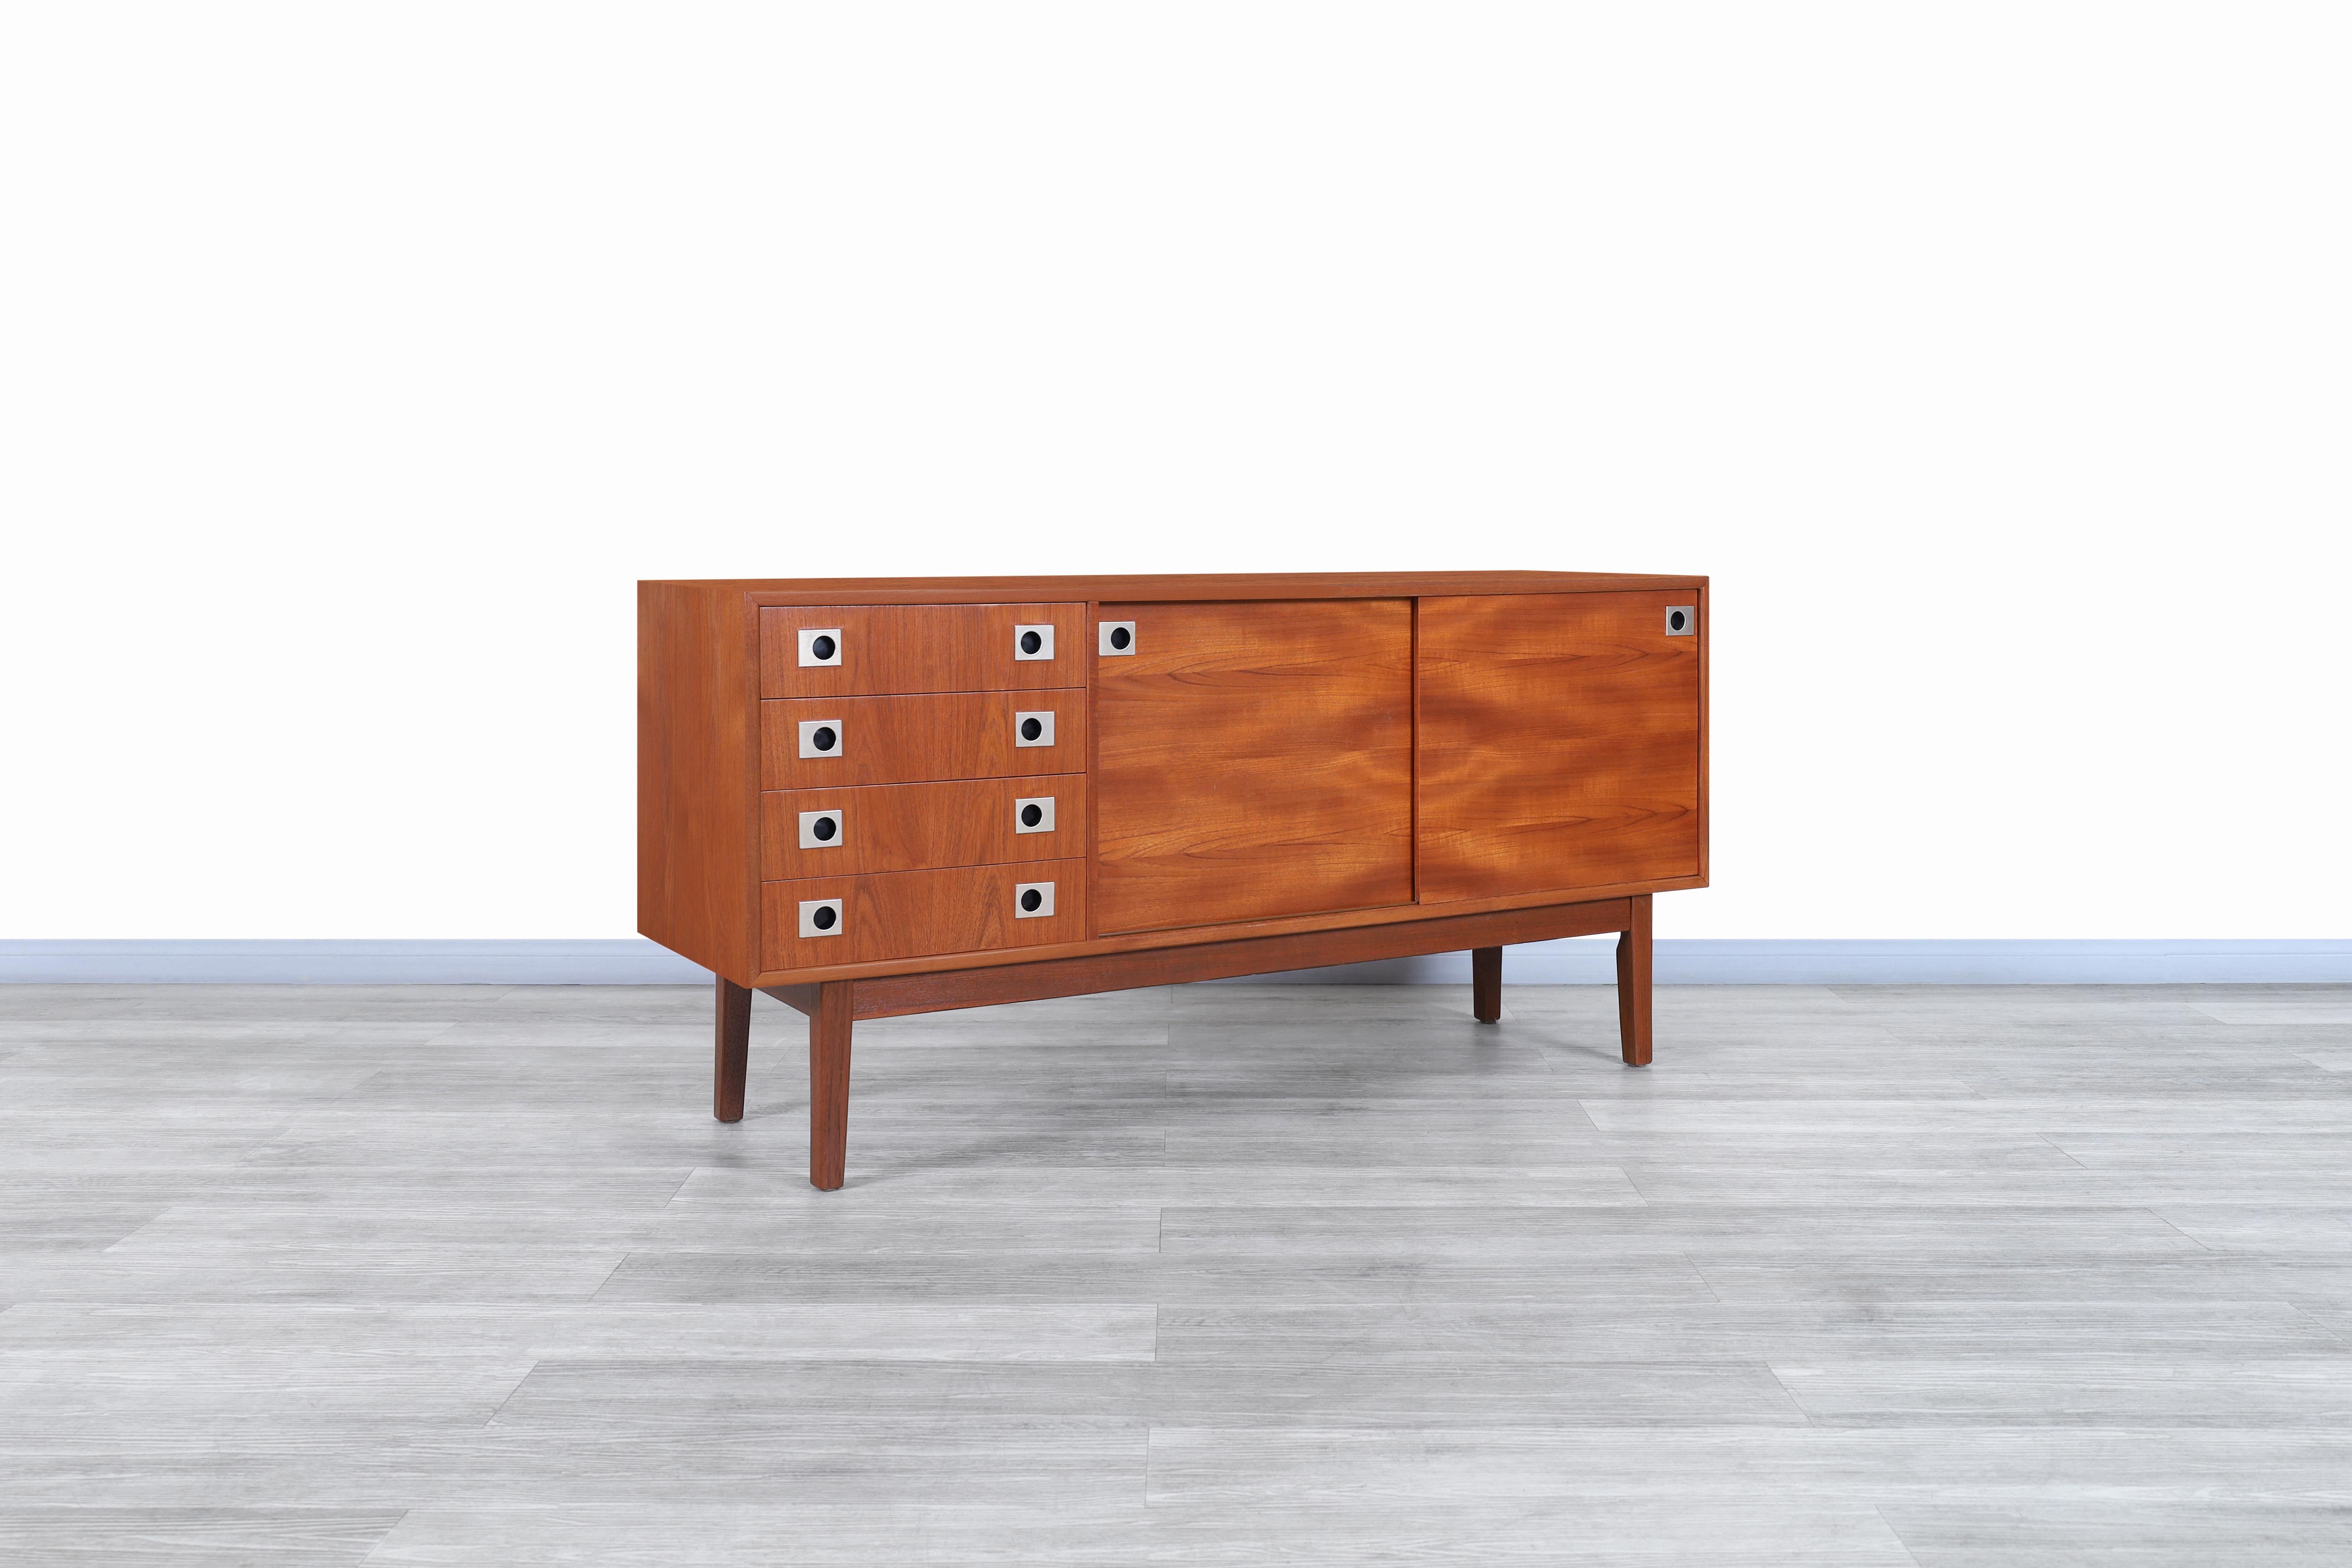 Stunning Mid-Century Modern teak credenza designed and manufactured in Canada, circa 1960s. This credenza has been built from teak wood, presenting a design inspired by some of the most representative models in the mid-century area. Features two